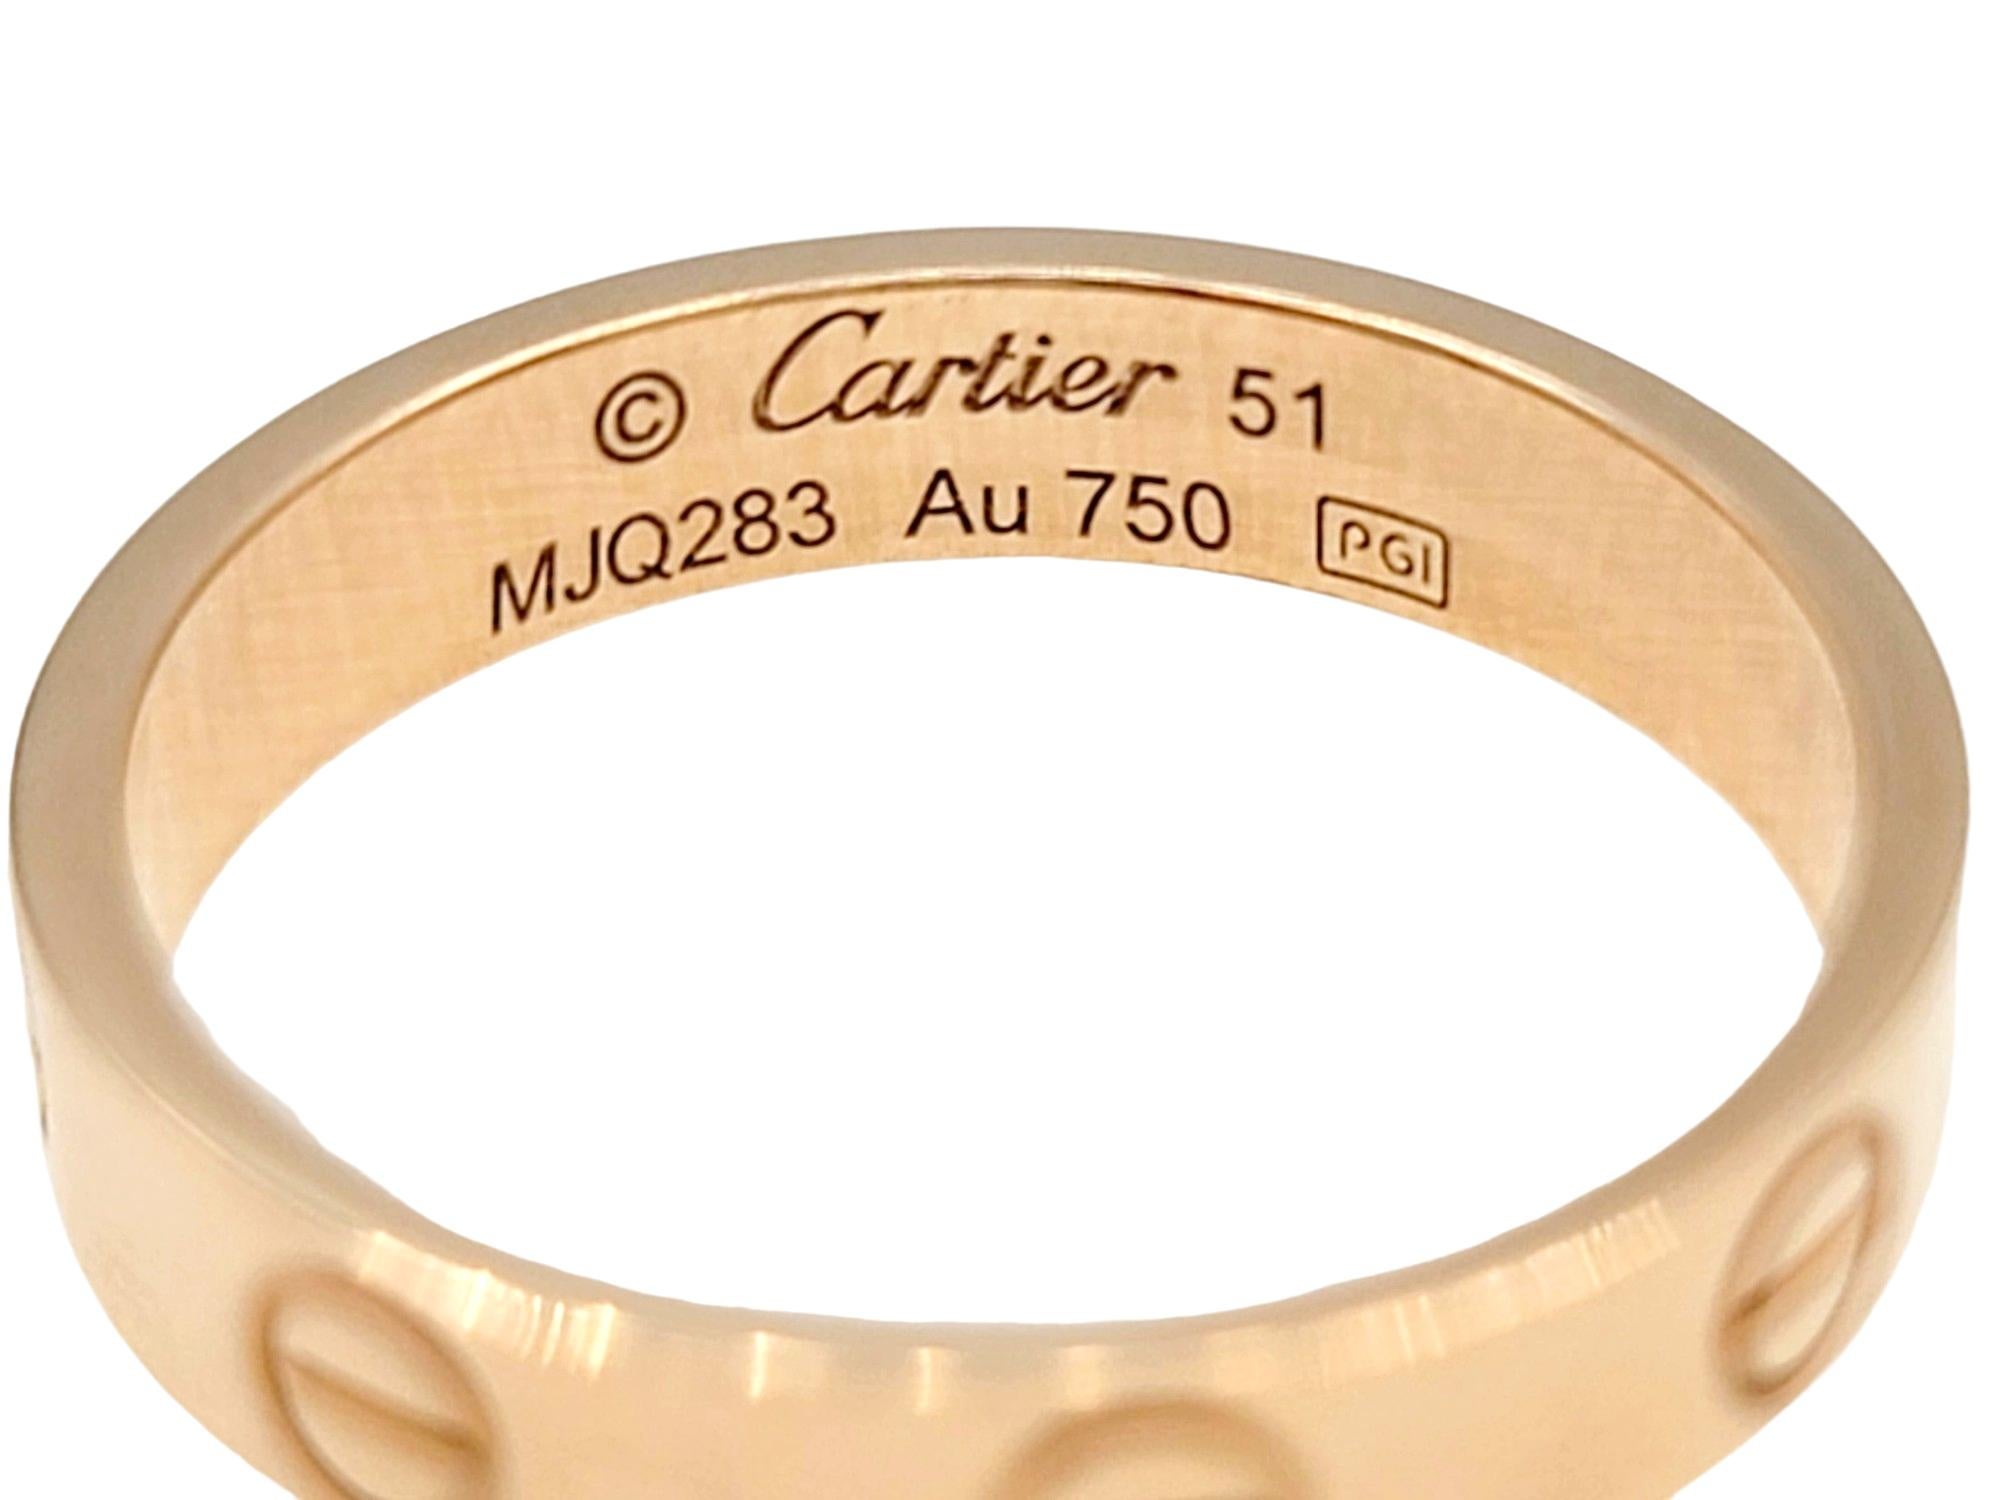 Cartier Love Collection Narrow Polished 18 Karat Rose Gold Band Ring  In Good Condition For Sale In Scottsdale, AZ